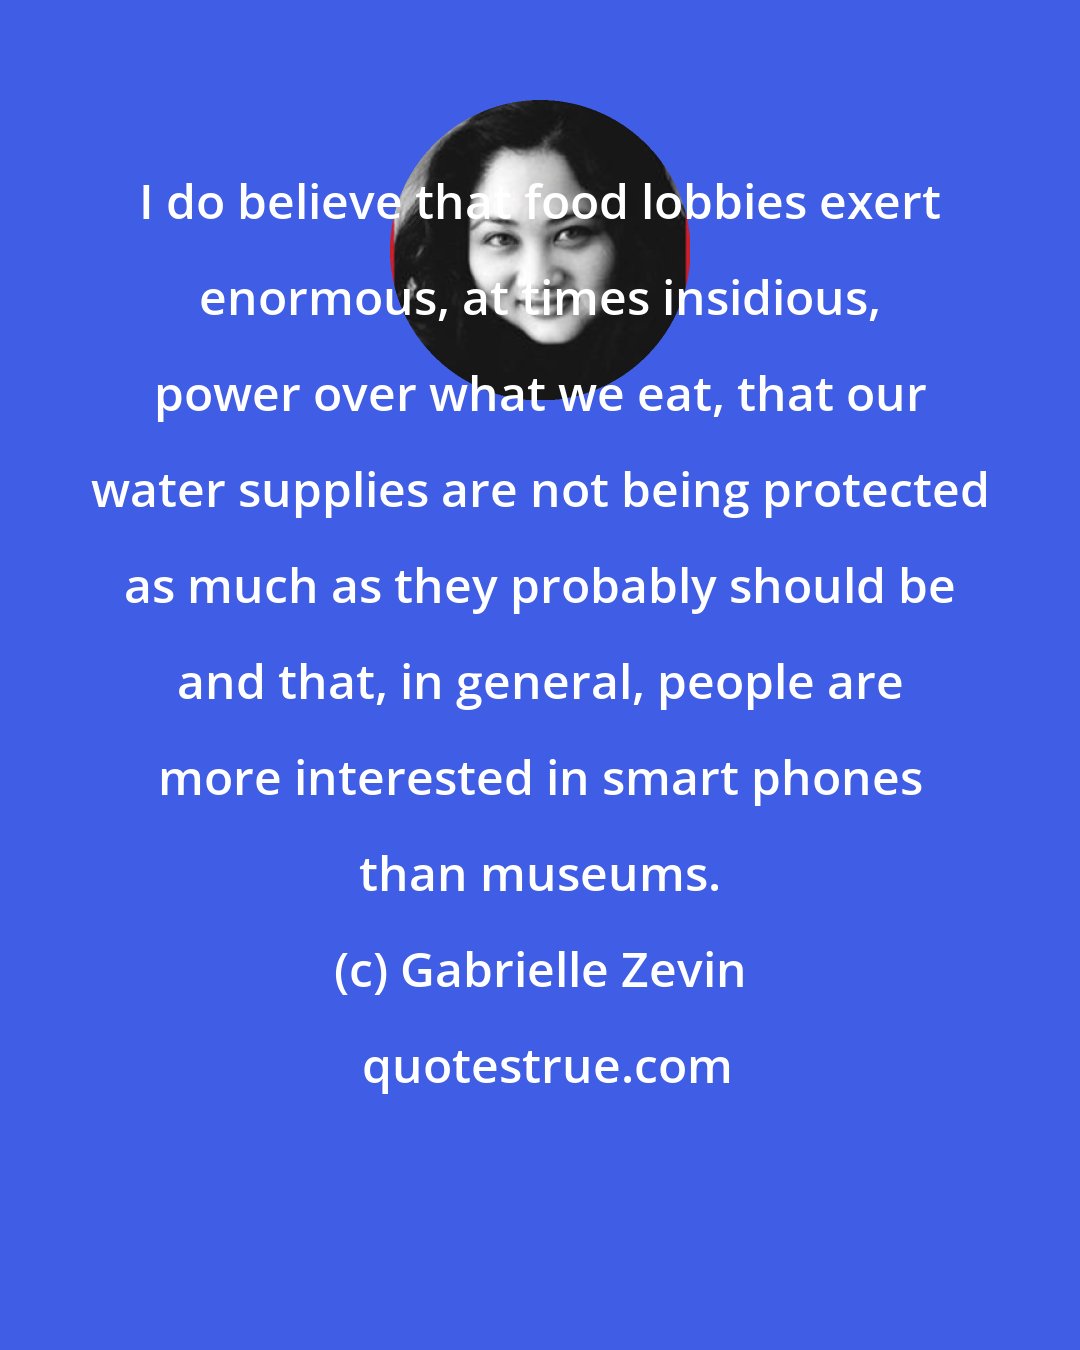 Gabrielle Zevin: I do believe that food lobbies exert enormous, at times insidious, power over what we eat, that our water supplies are not being protected as much as they probably should be and that, in general, people are more interested in smart phones than museums.